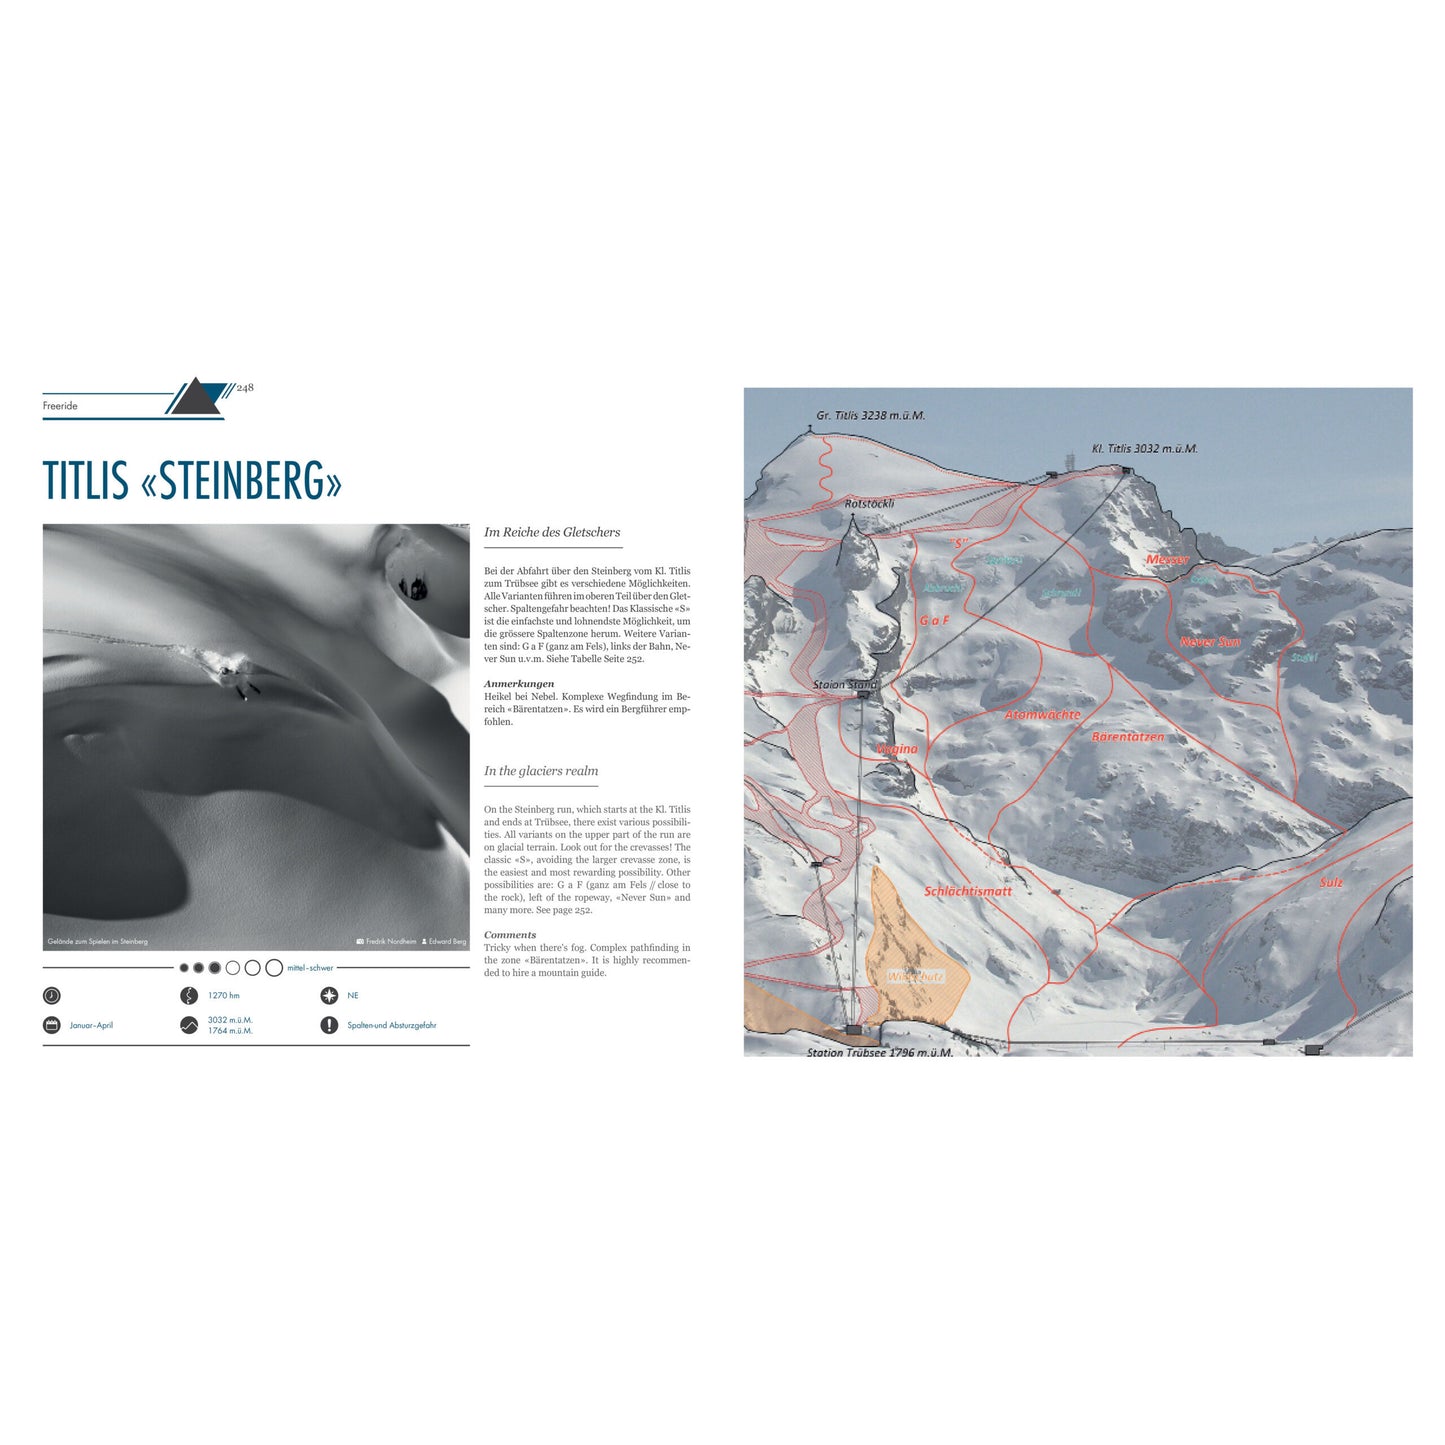 Engelberg Outdoor Guide | Backcountry Books